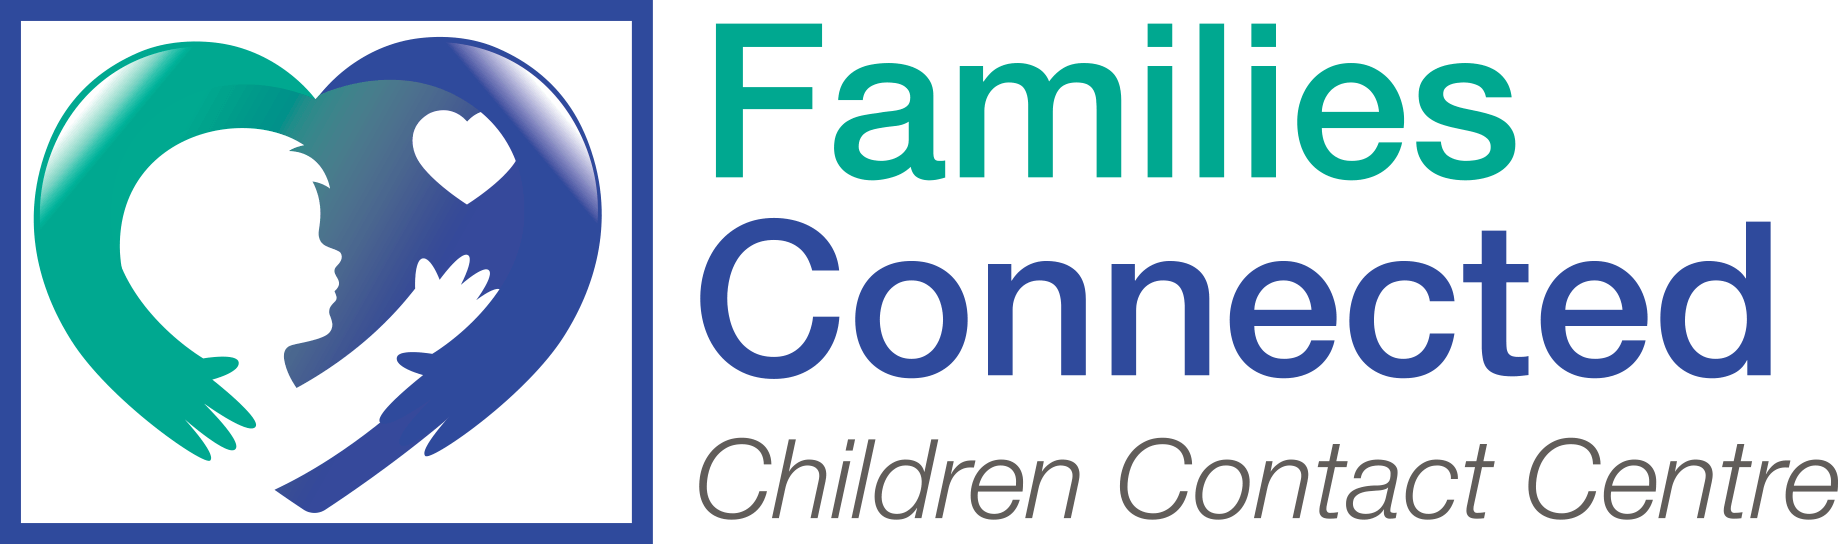 Families Connected logo